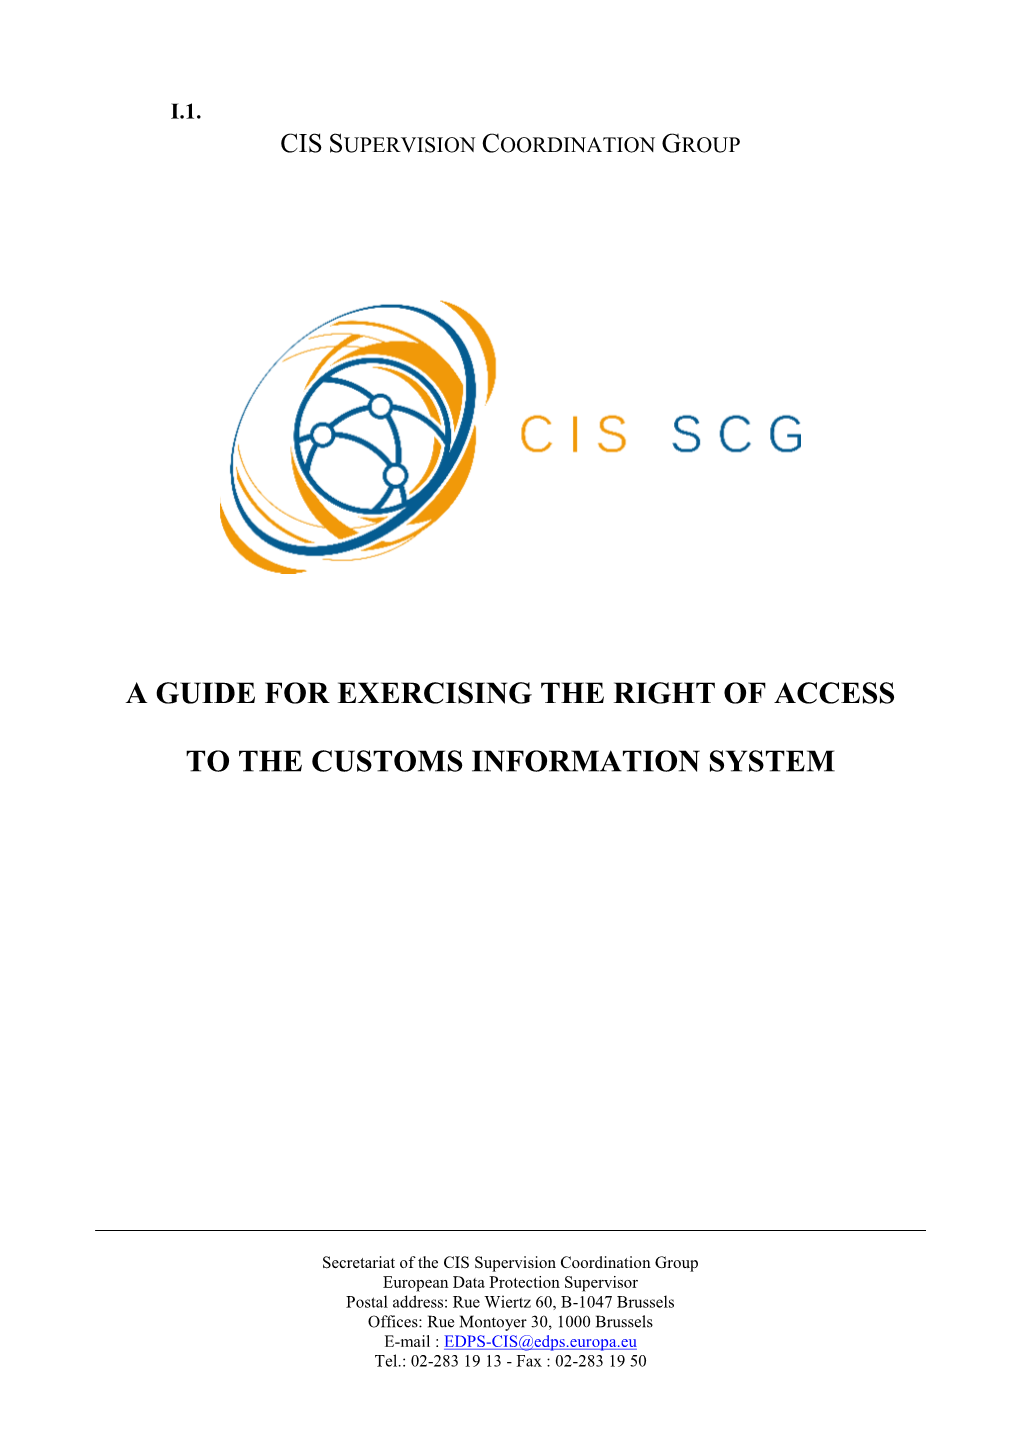 Guide for Exercising the Right of Access